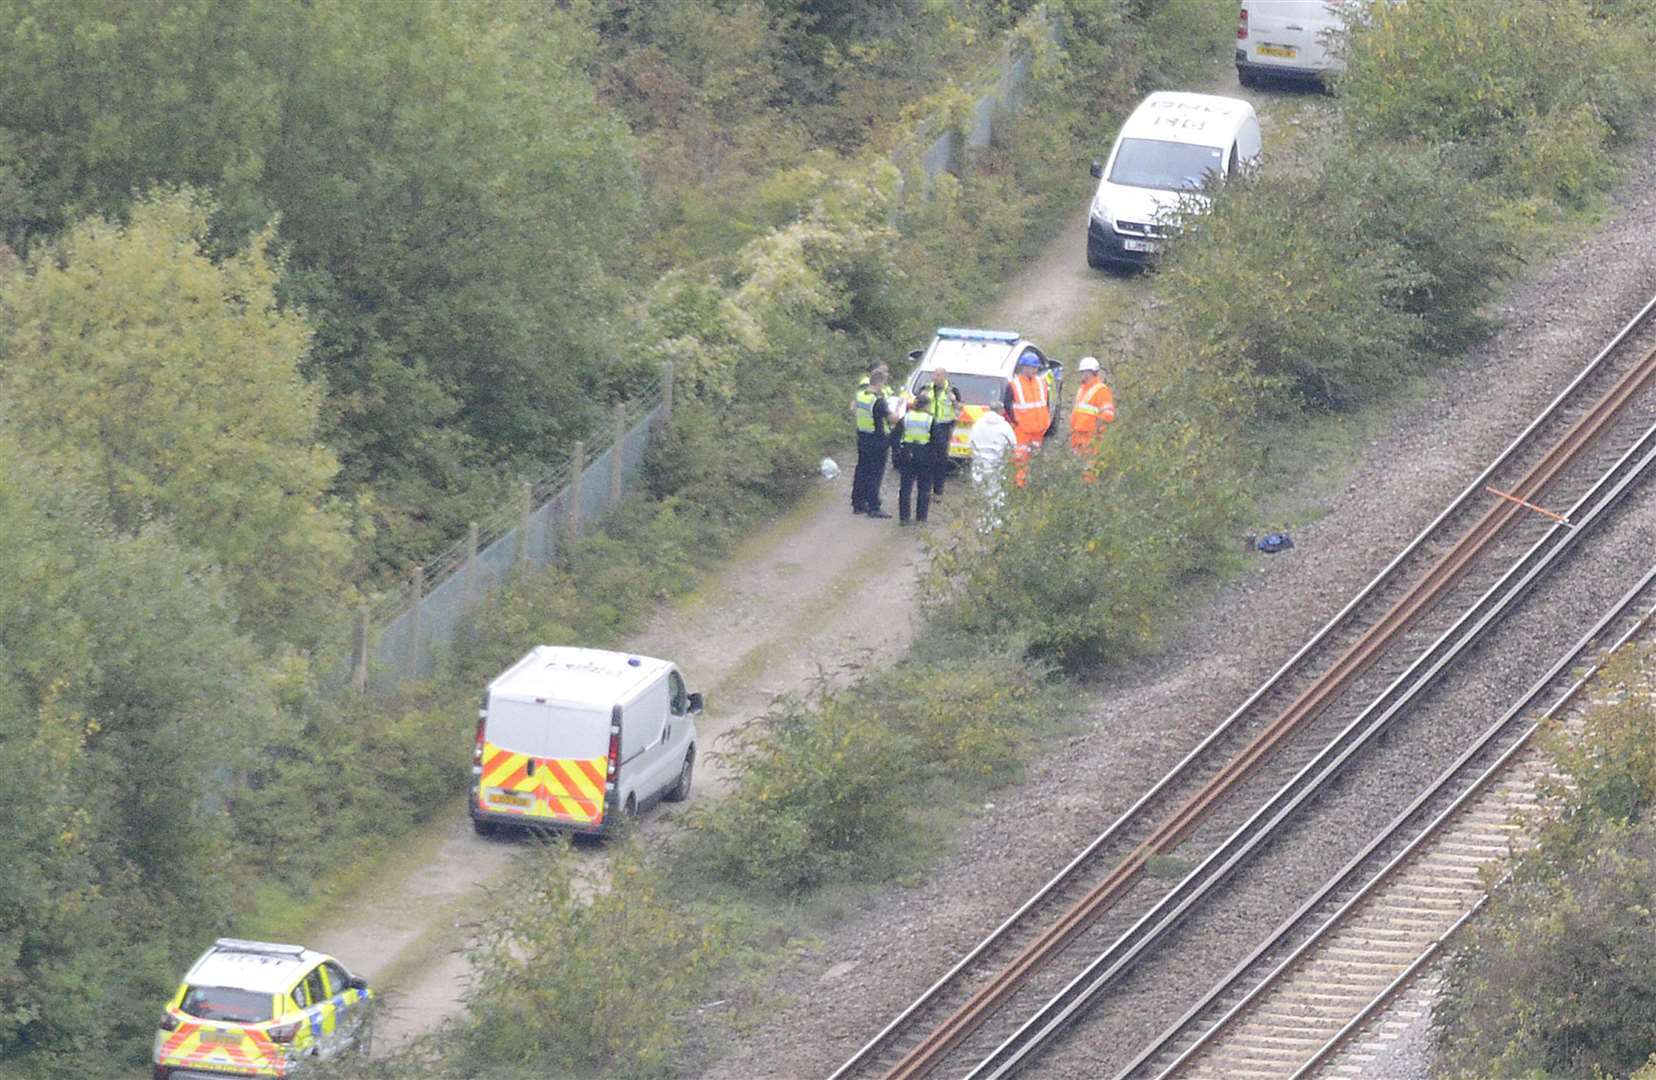 Police and rail officials at the scene. Picture: Paul Amos